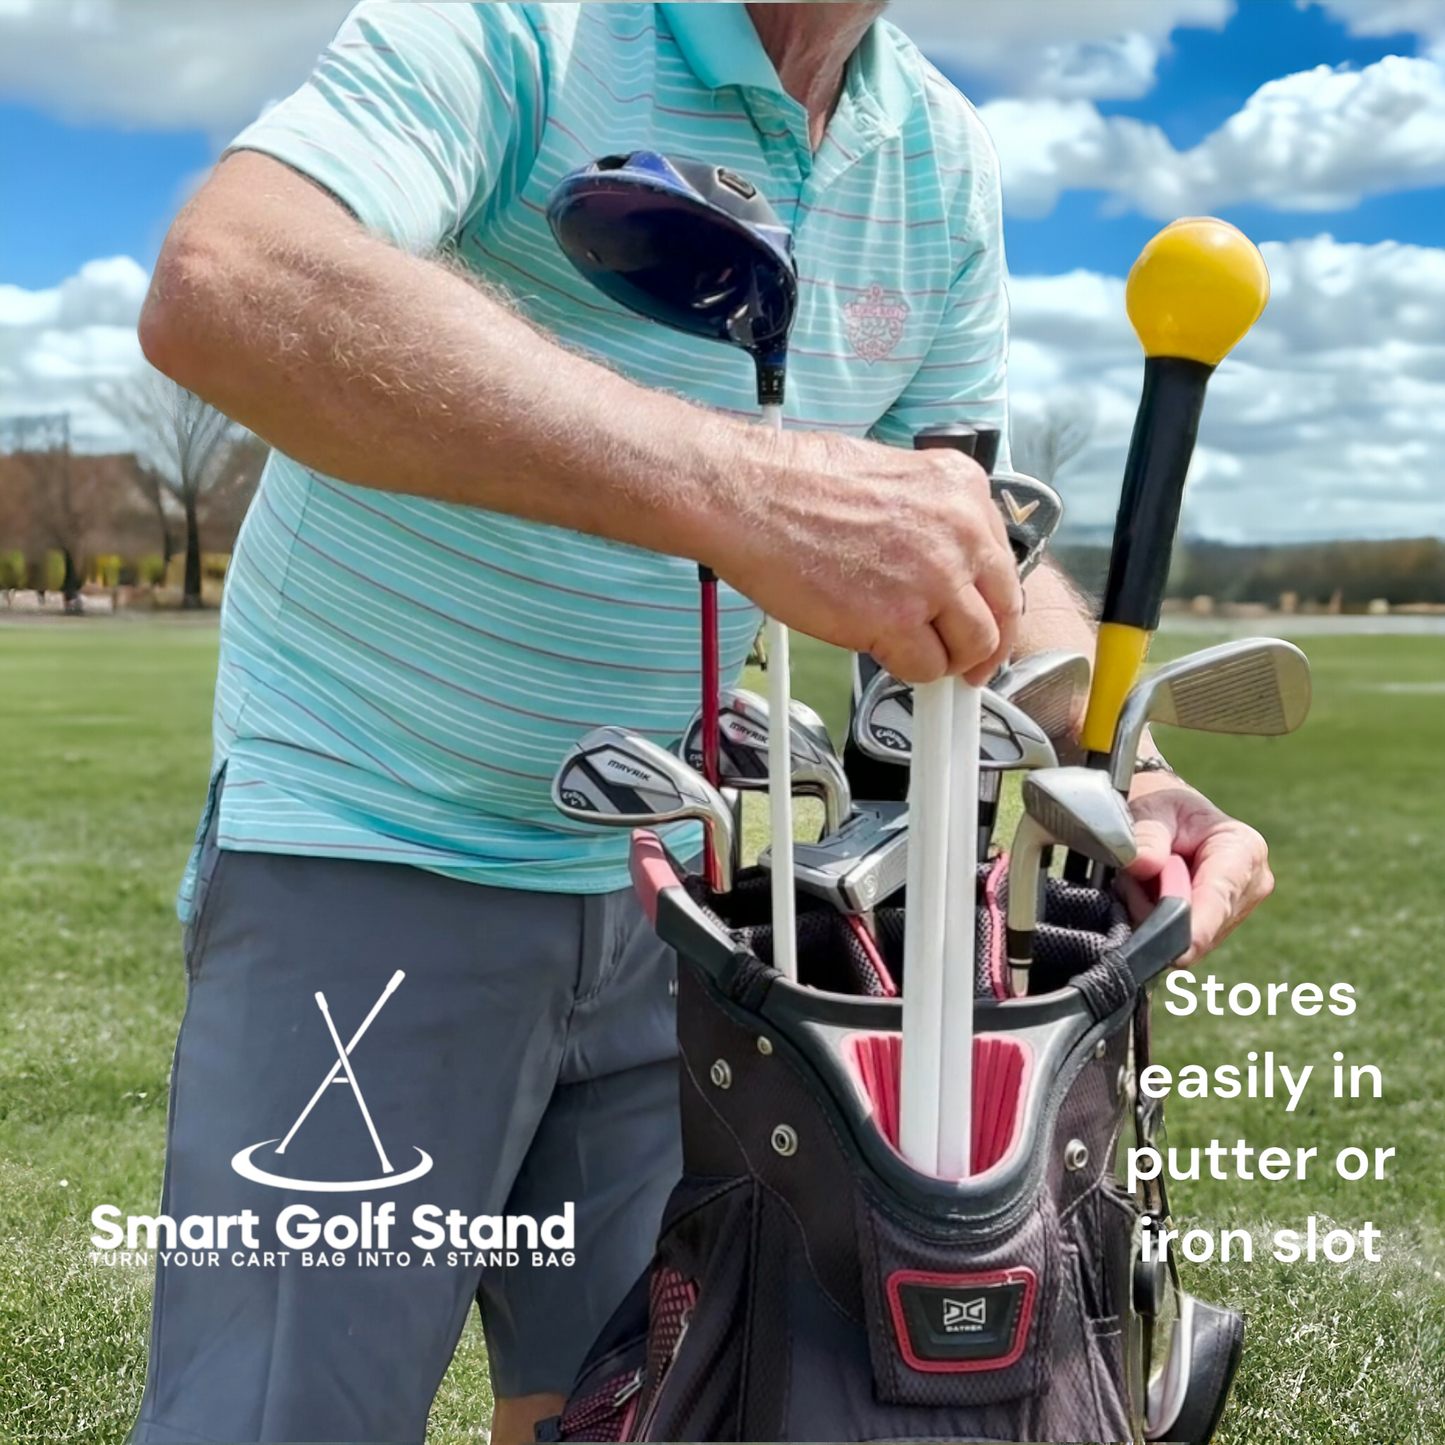 Smart Golf Stand 2.0: Turn your Cart bag into a Stand Bag!